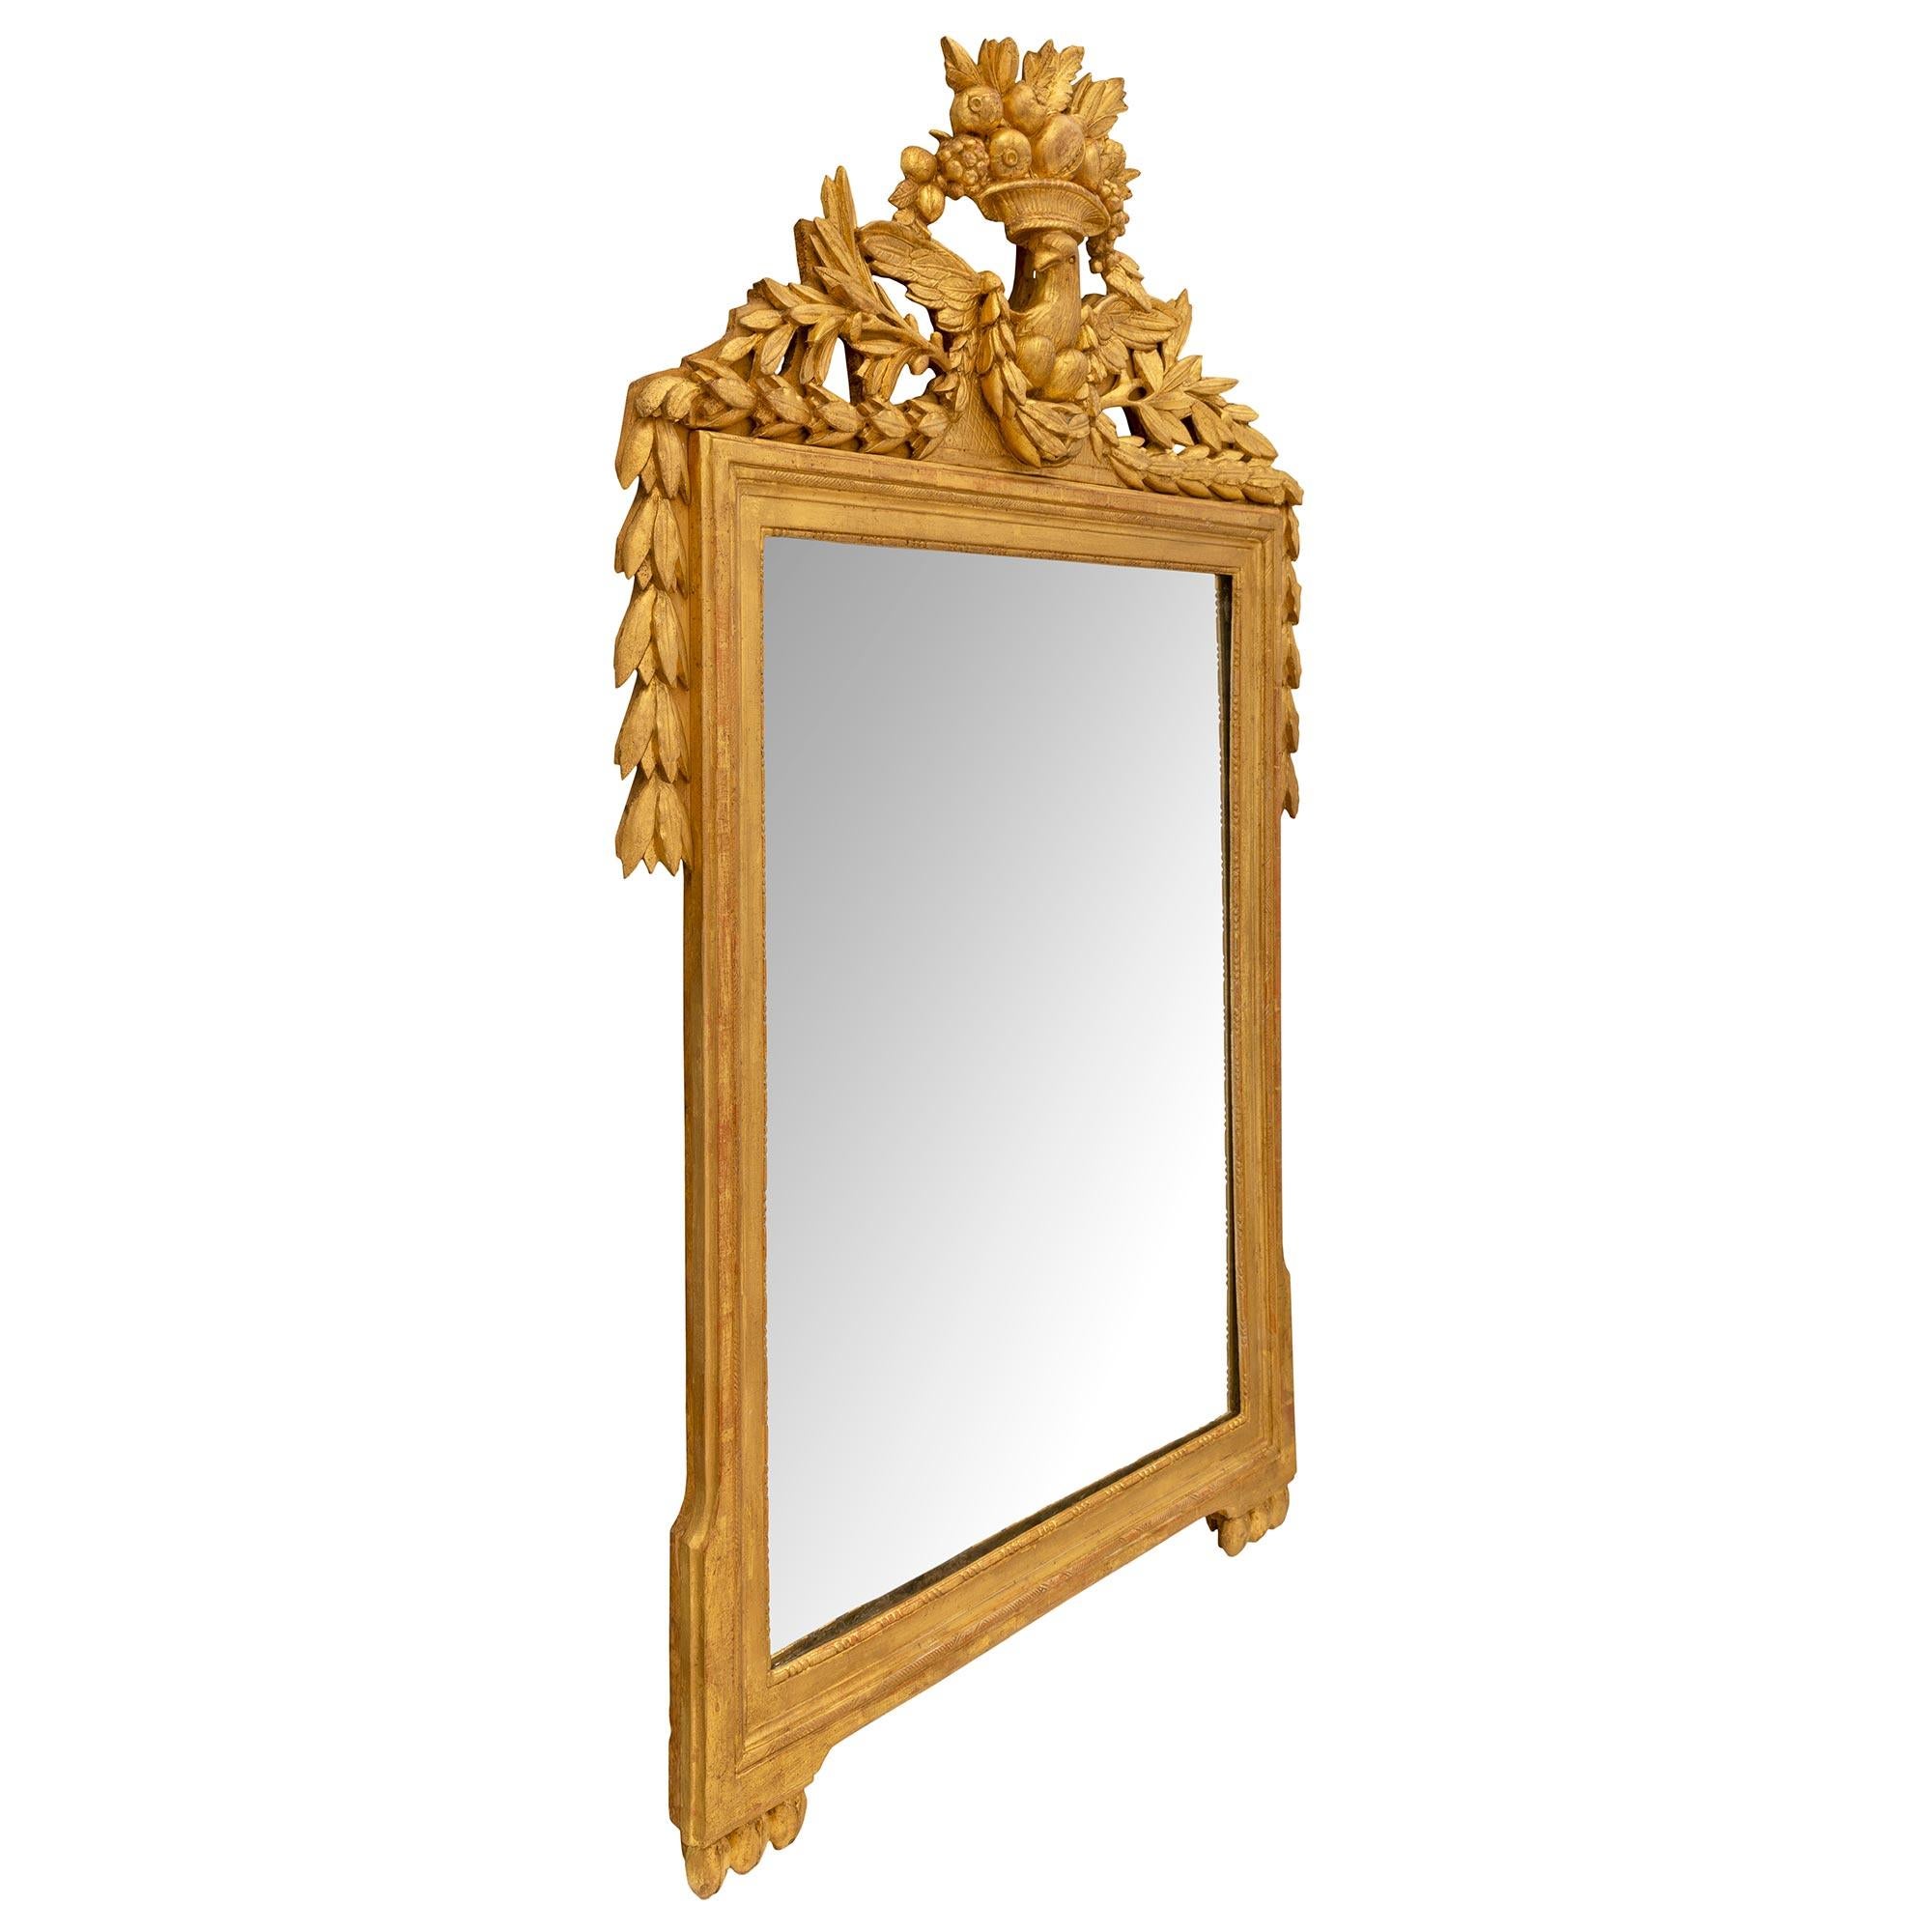 An outstanding and high quality French 18th century Louis XVI period giltwood mirror. The mirror retains its original mirror plate set within an elegant mottled giltwood frame with a beaded and fine etched design. The majestic top crown displays a